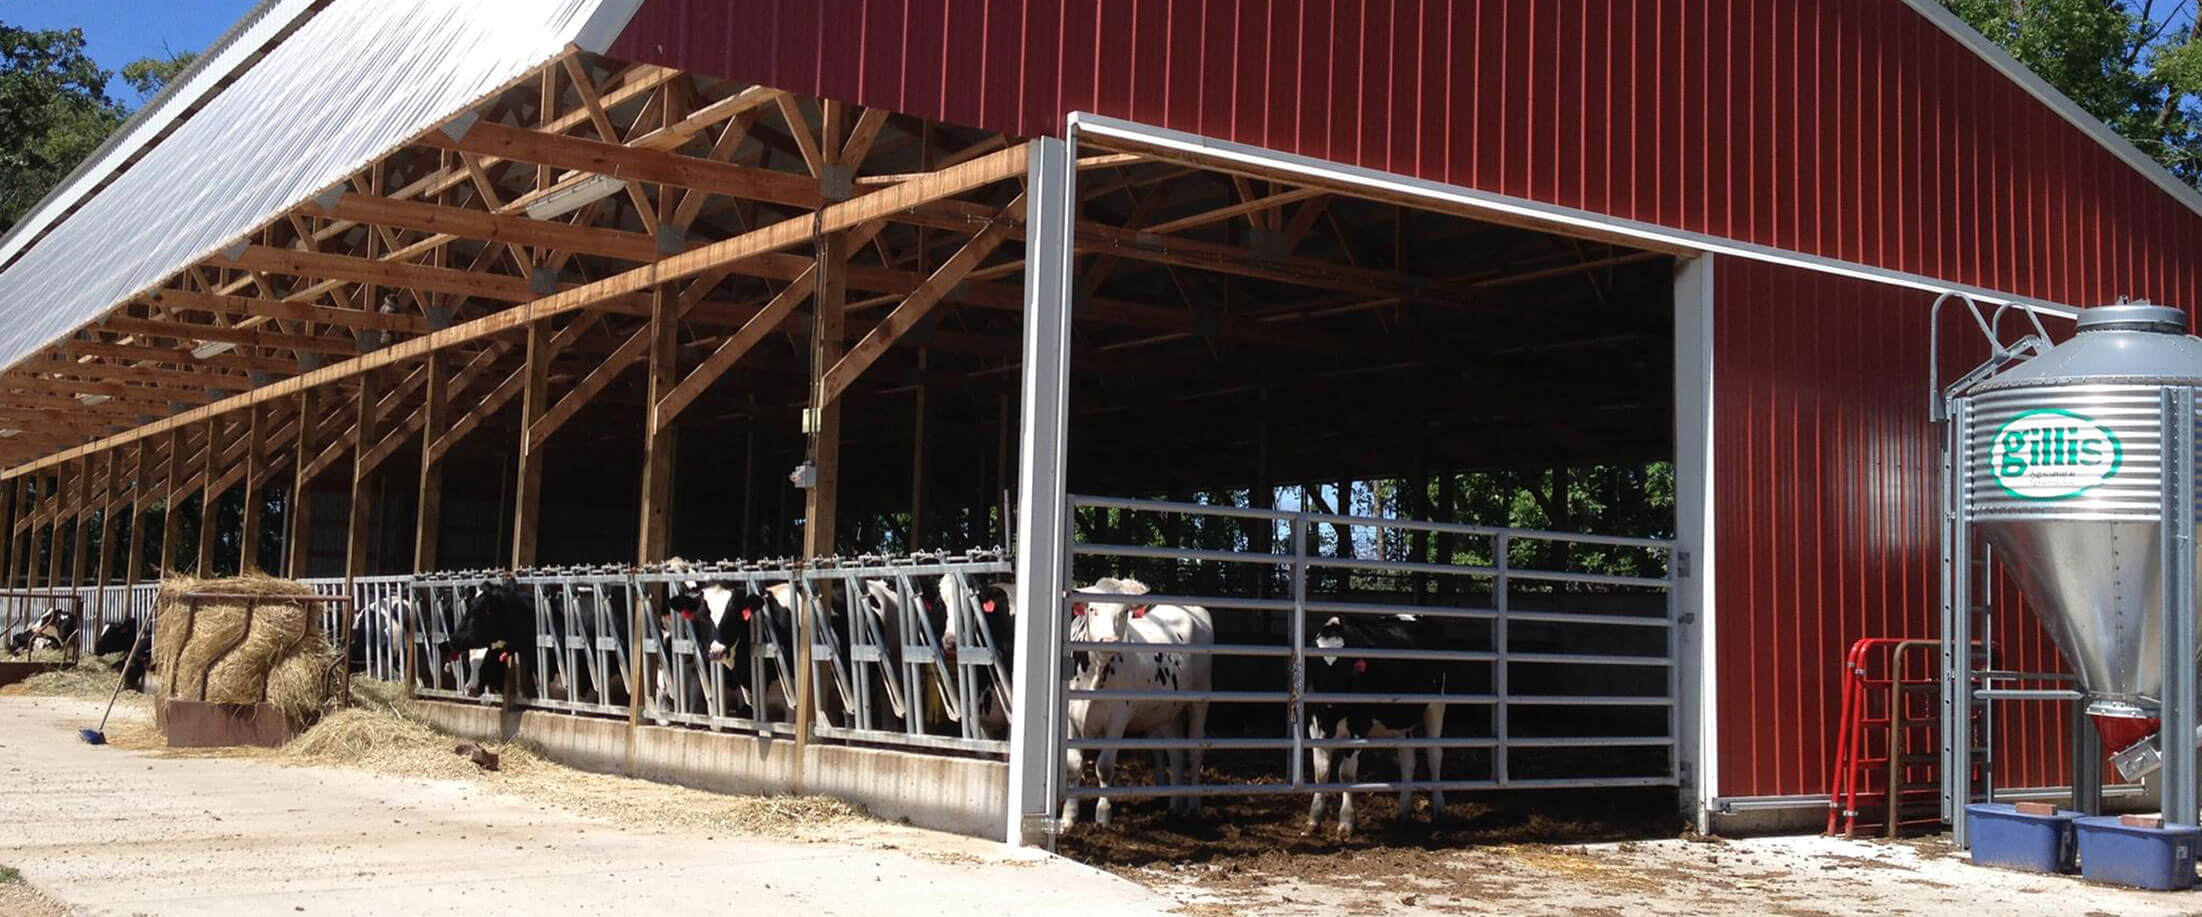 Newly completed calf barn with materials and construction services provided by Lifestyle Lumber